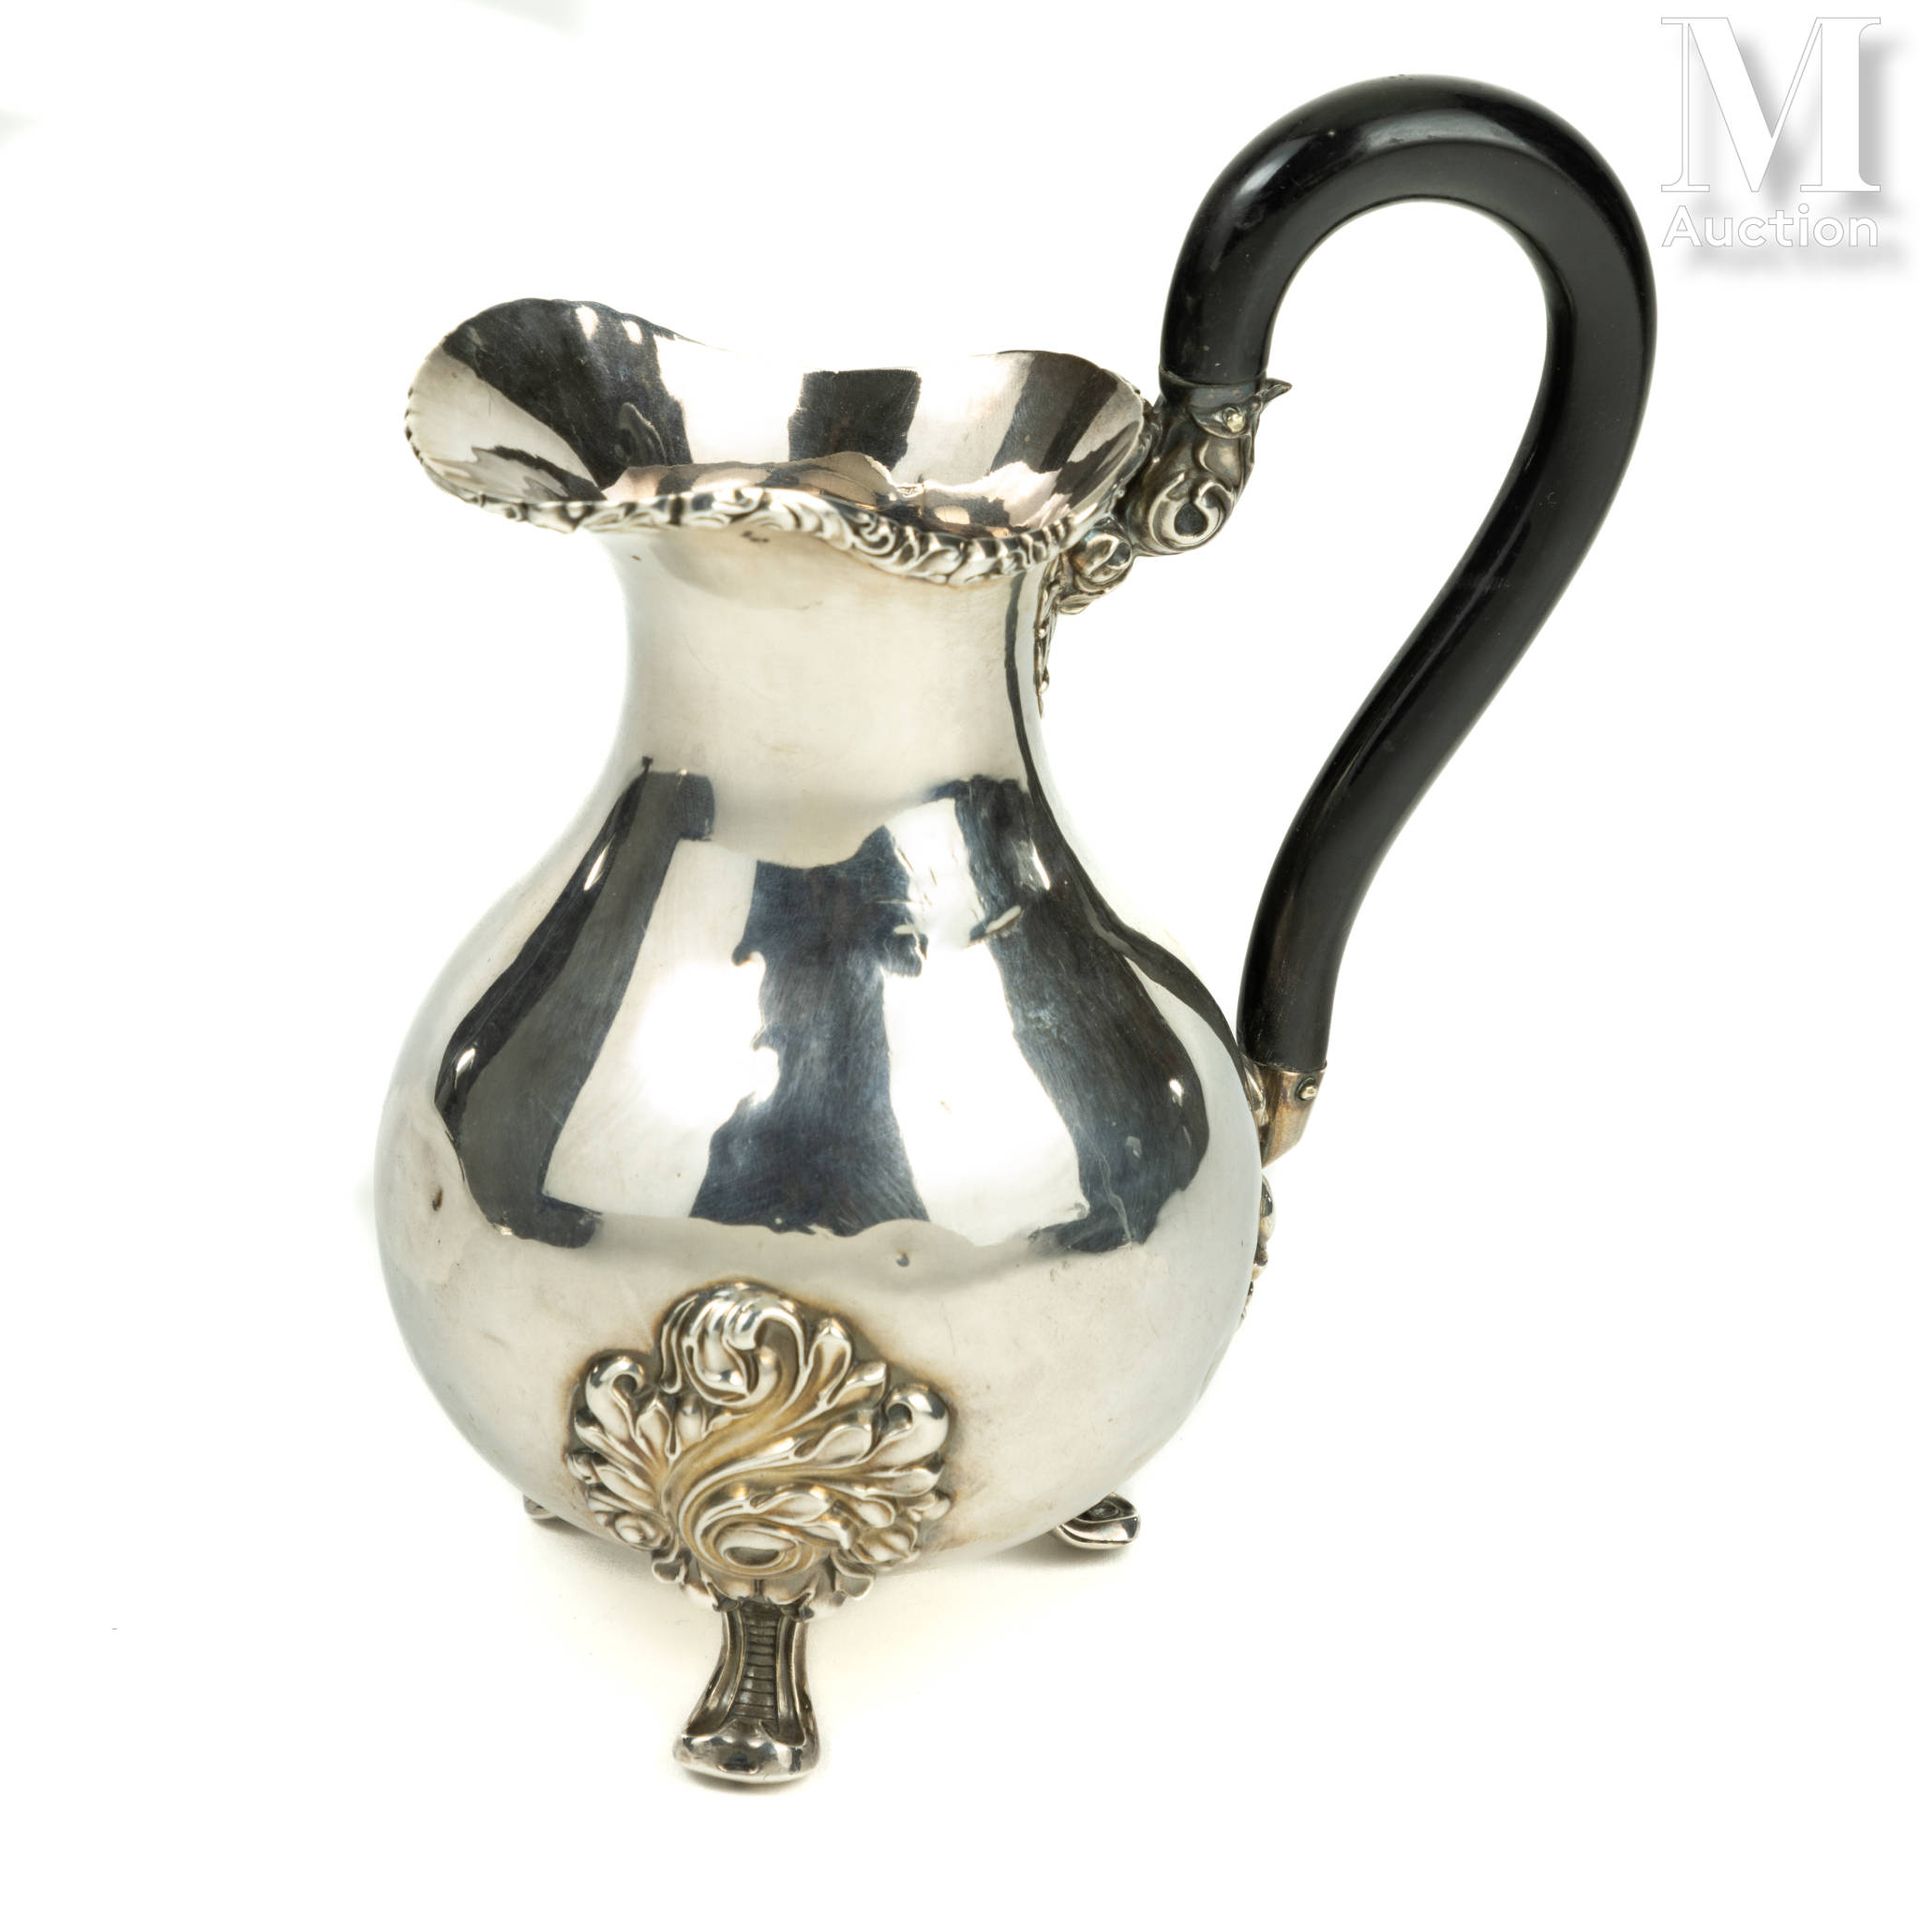 Verseuse en argent uni Silver jug, supported by three feet with scroll decoratio&hellip;